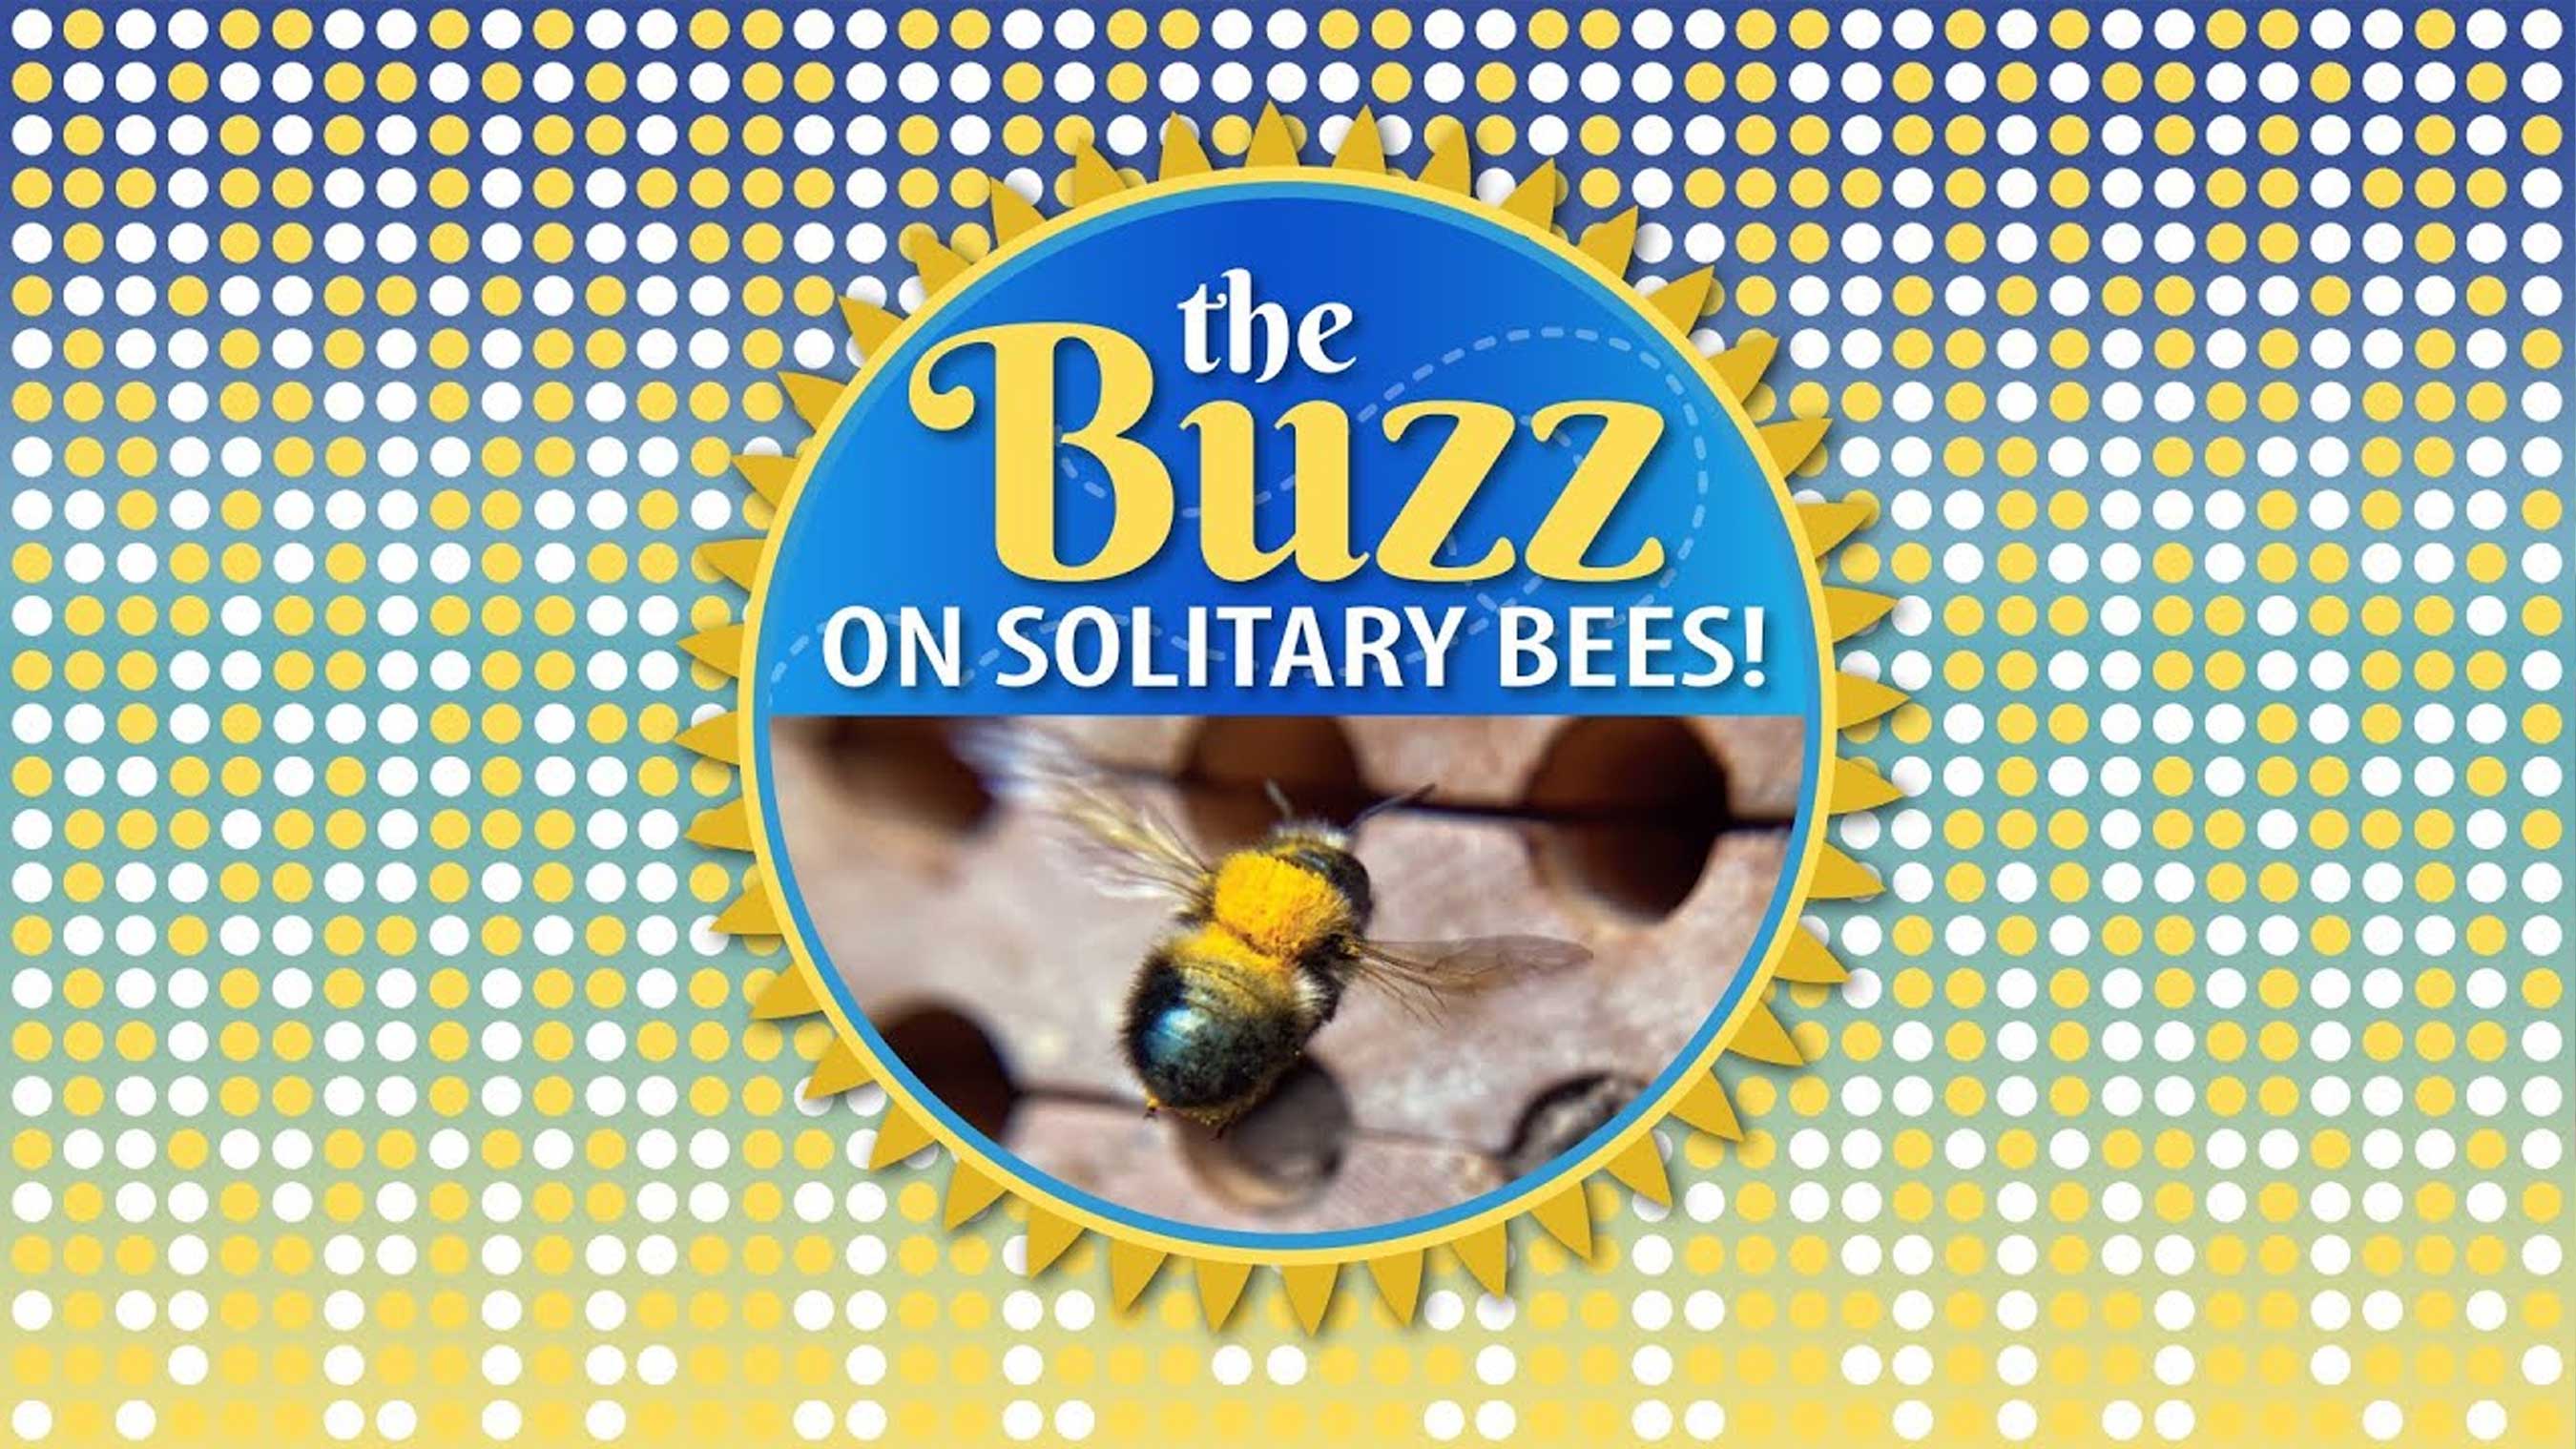 Learn more about solitary bees!